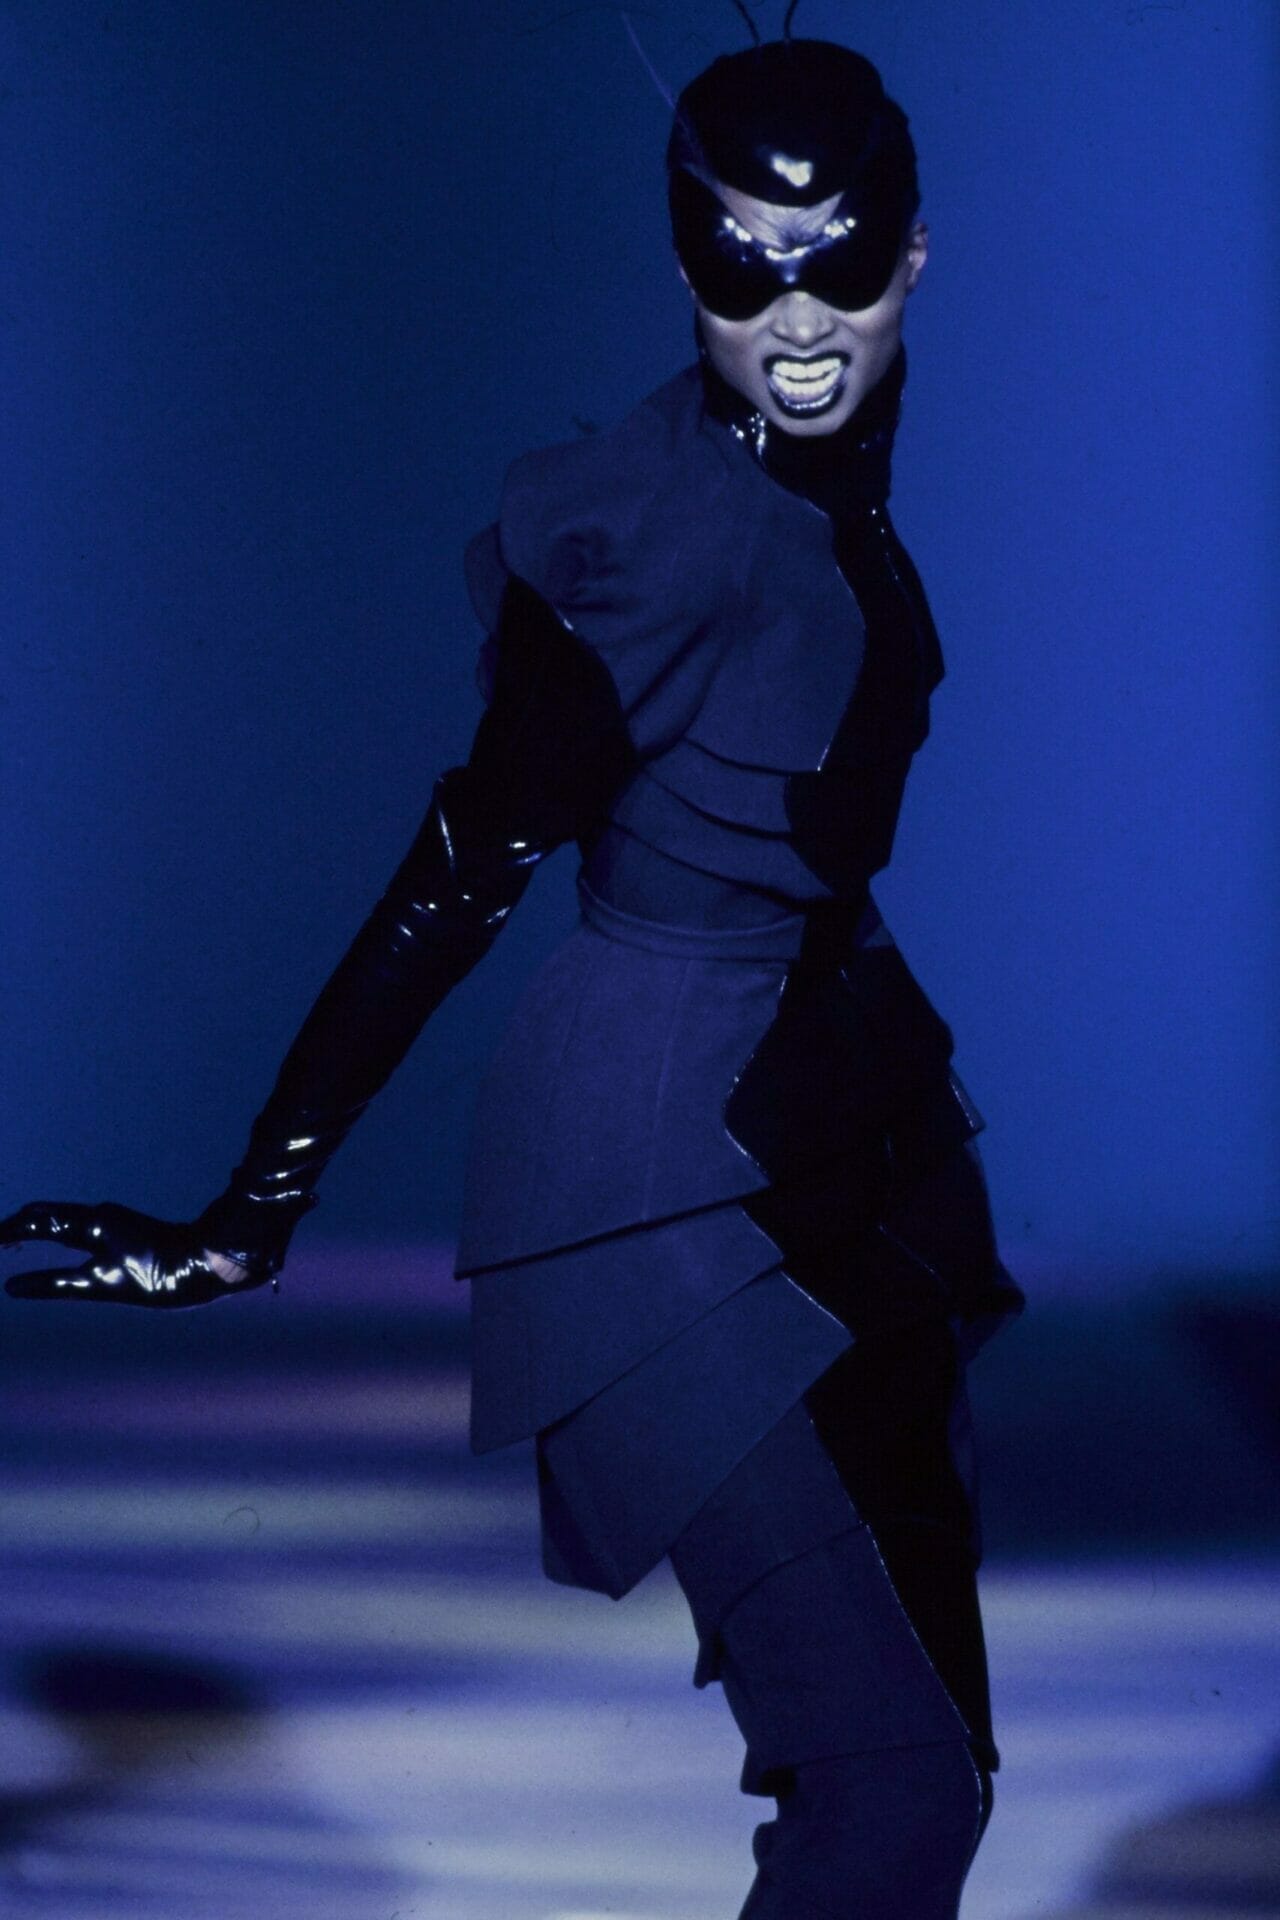 THIERRY MUGLER READY-TO-WEAR SPRING-SUMMER 1997. RUNWAY MAGAZINE ® Collections Special Selection “Fashion Treasure”. RUNWAY MAGAZINE ® Collections. RUNWAY NOW / RUNWAY NEW